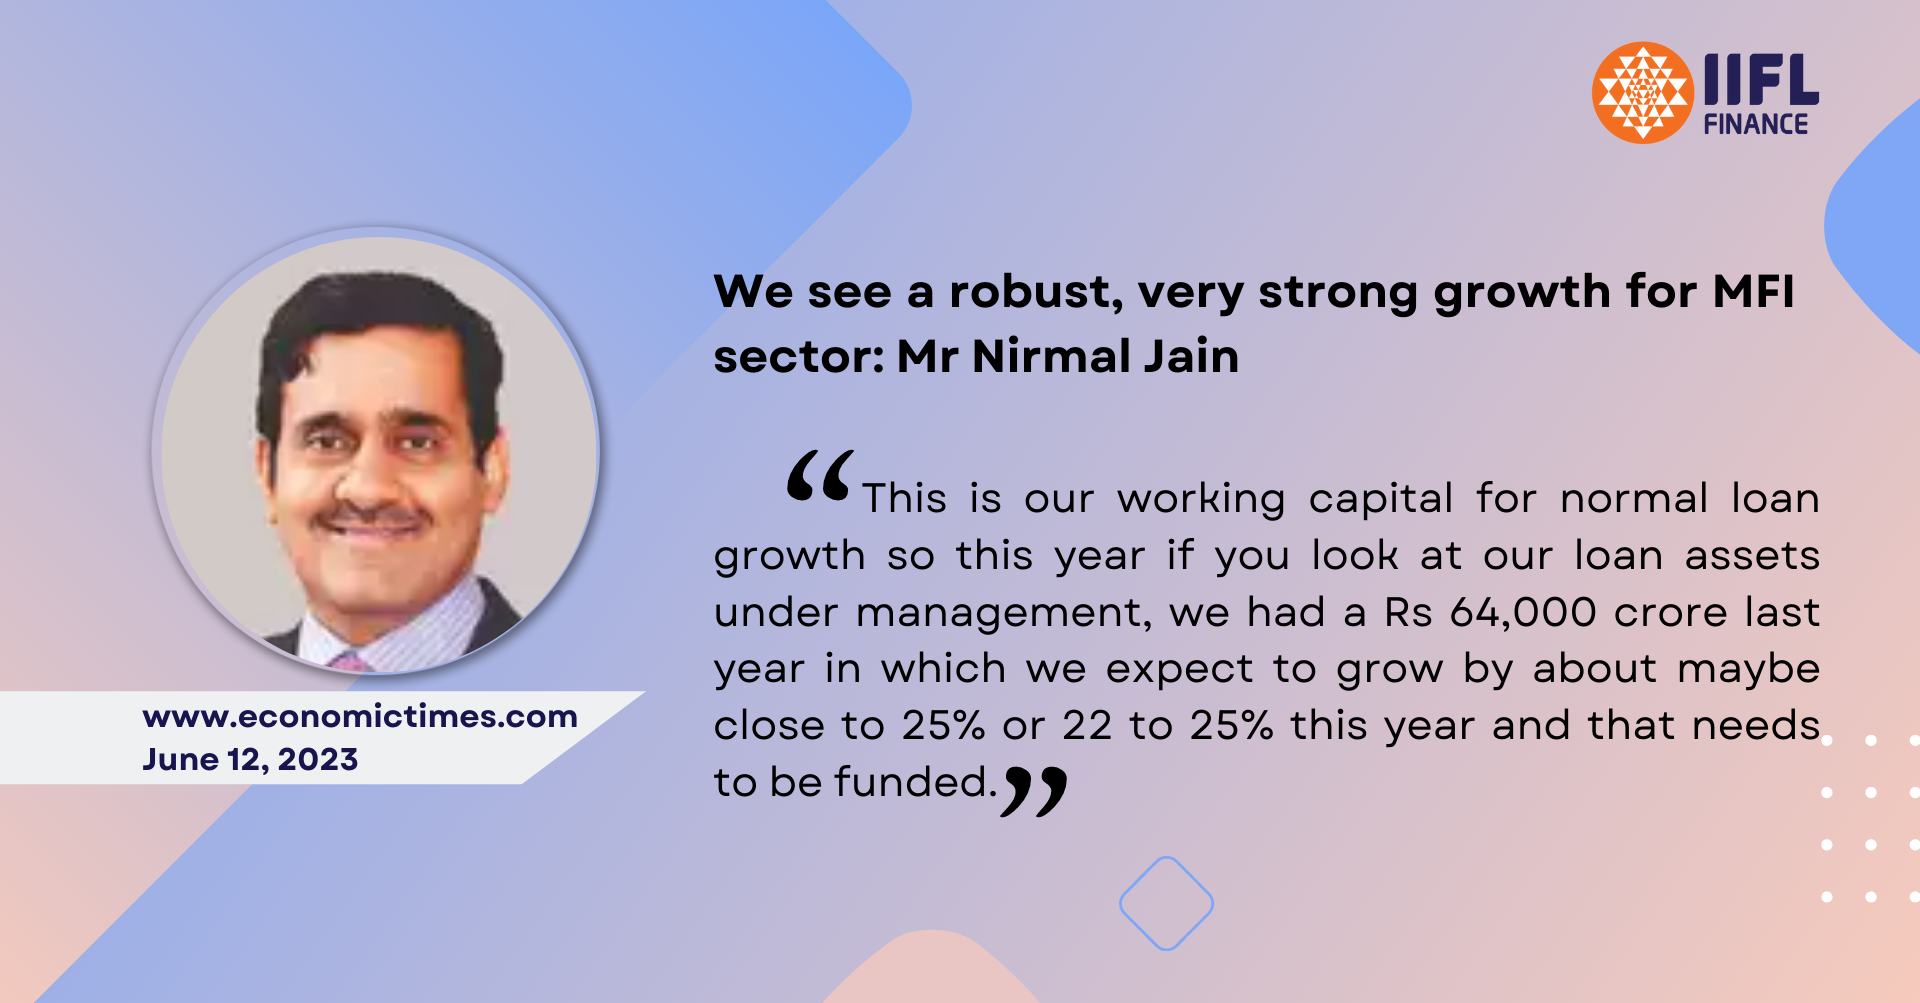 We see a robust, very strong growth for MFI sector: Mr Nirmal Jain